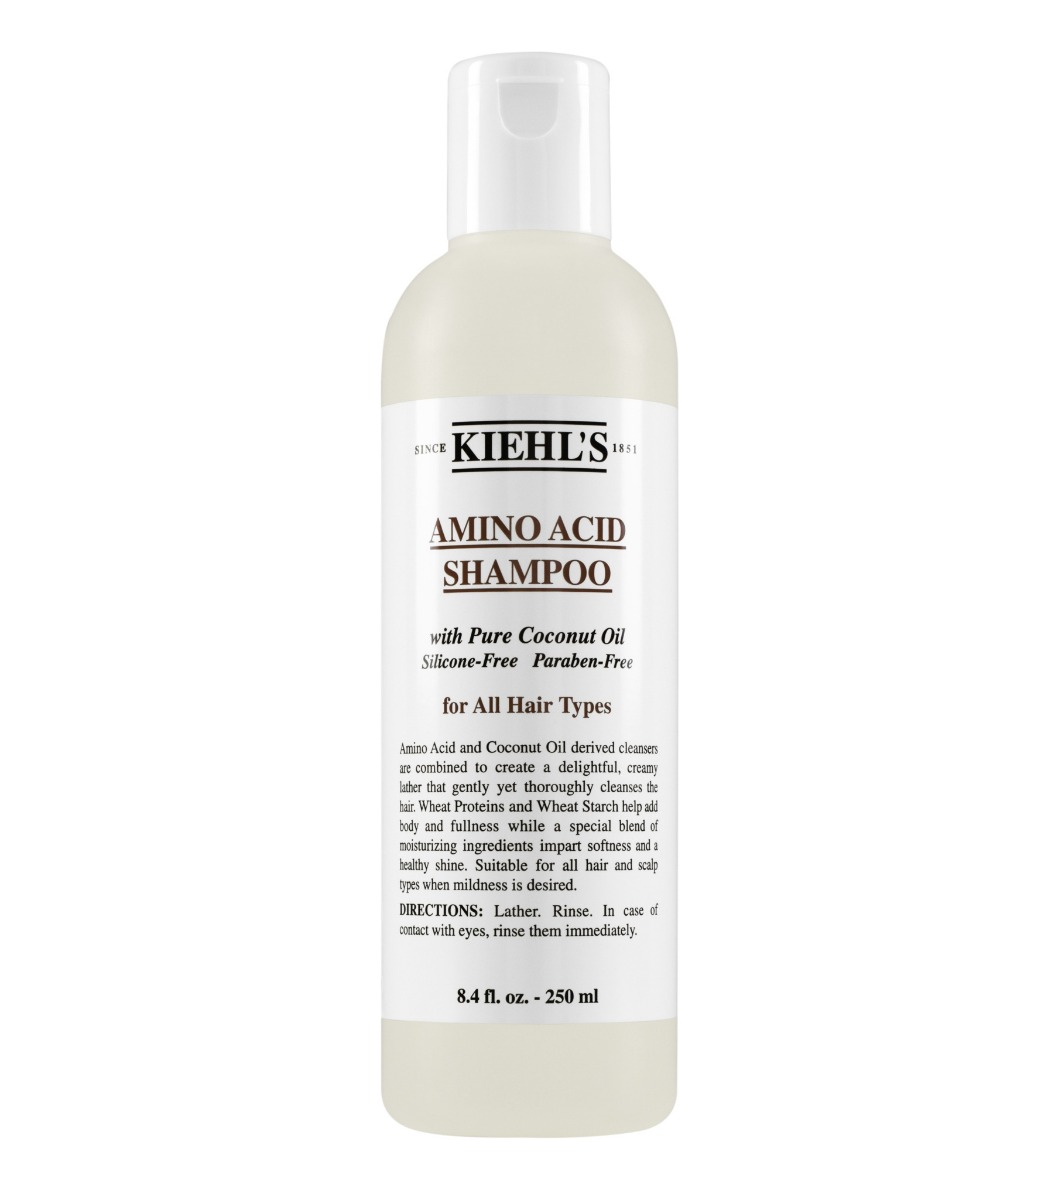 Hair Care Products - Buy Kiehl's Hair Shampoo, Conditioners & Serum